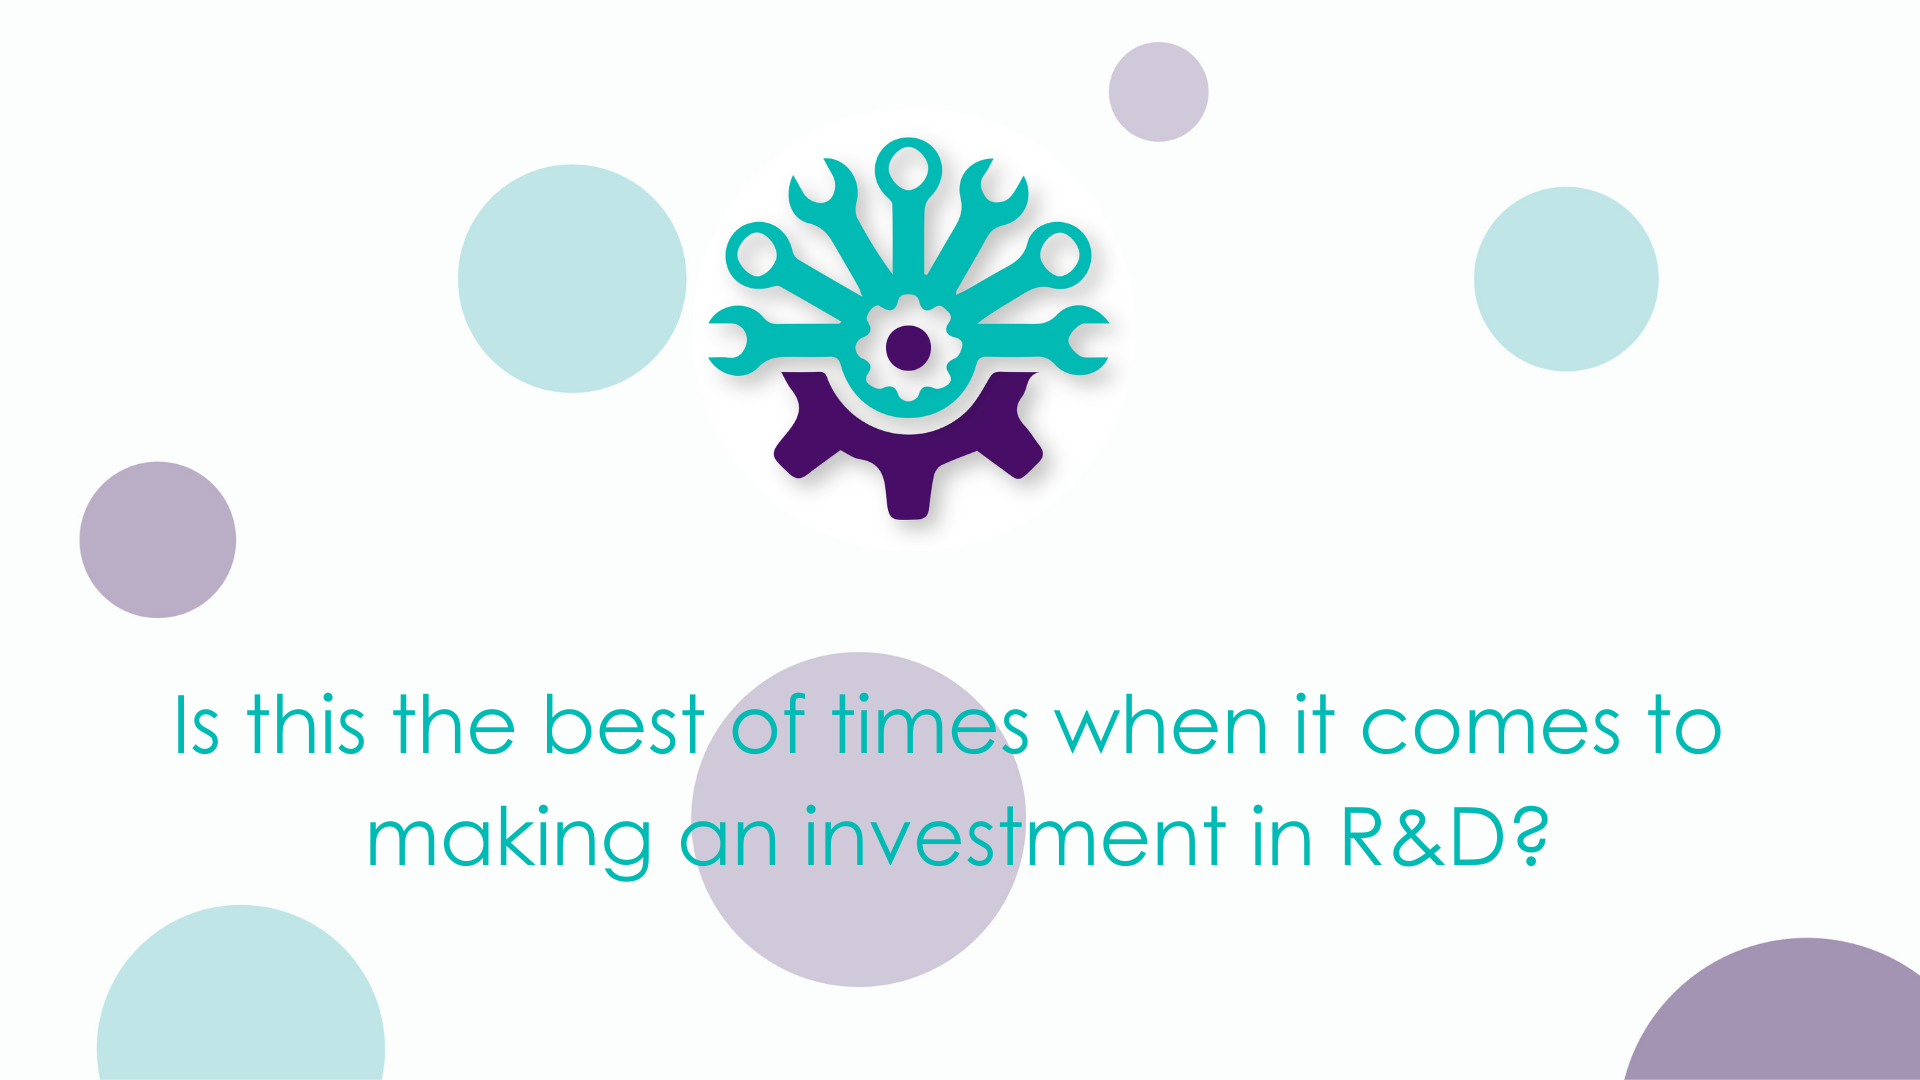 Is this the best of times when it comes to making an investment in R&D?